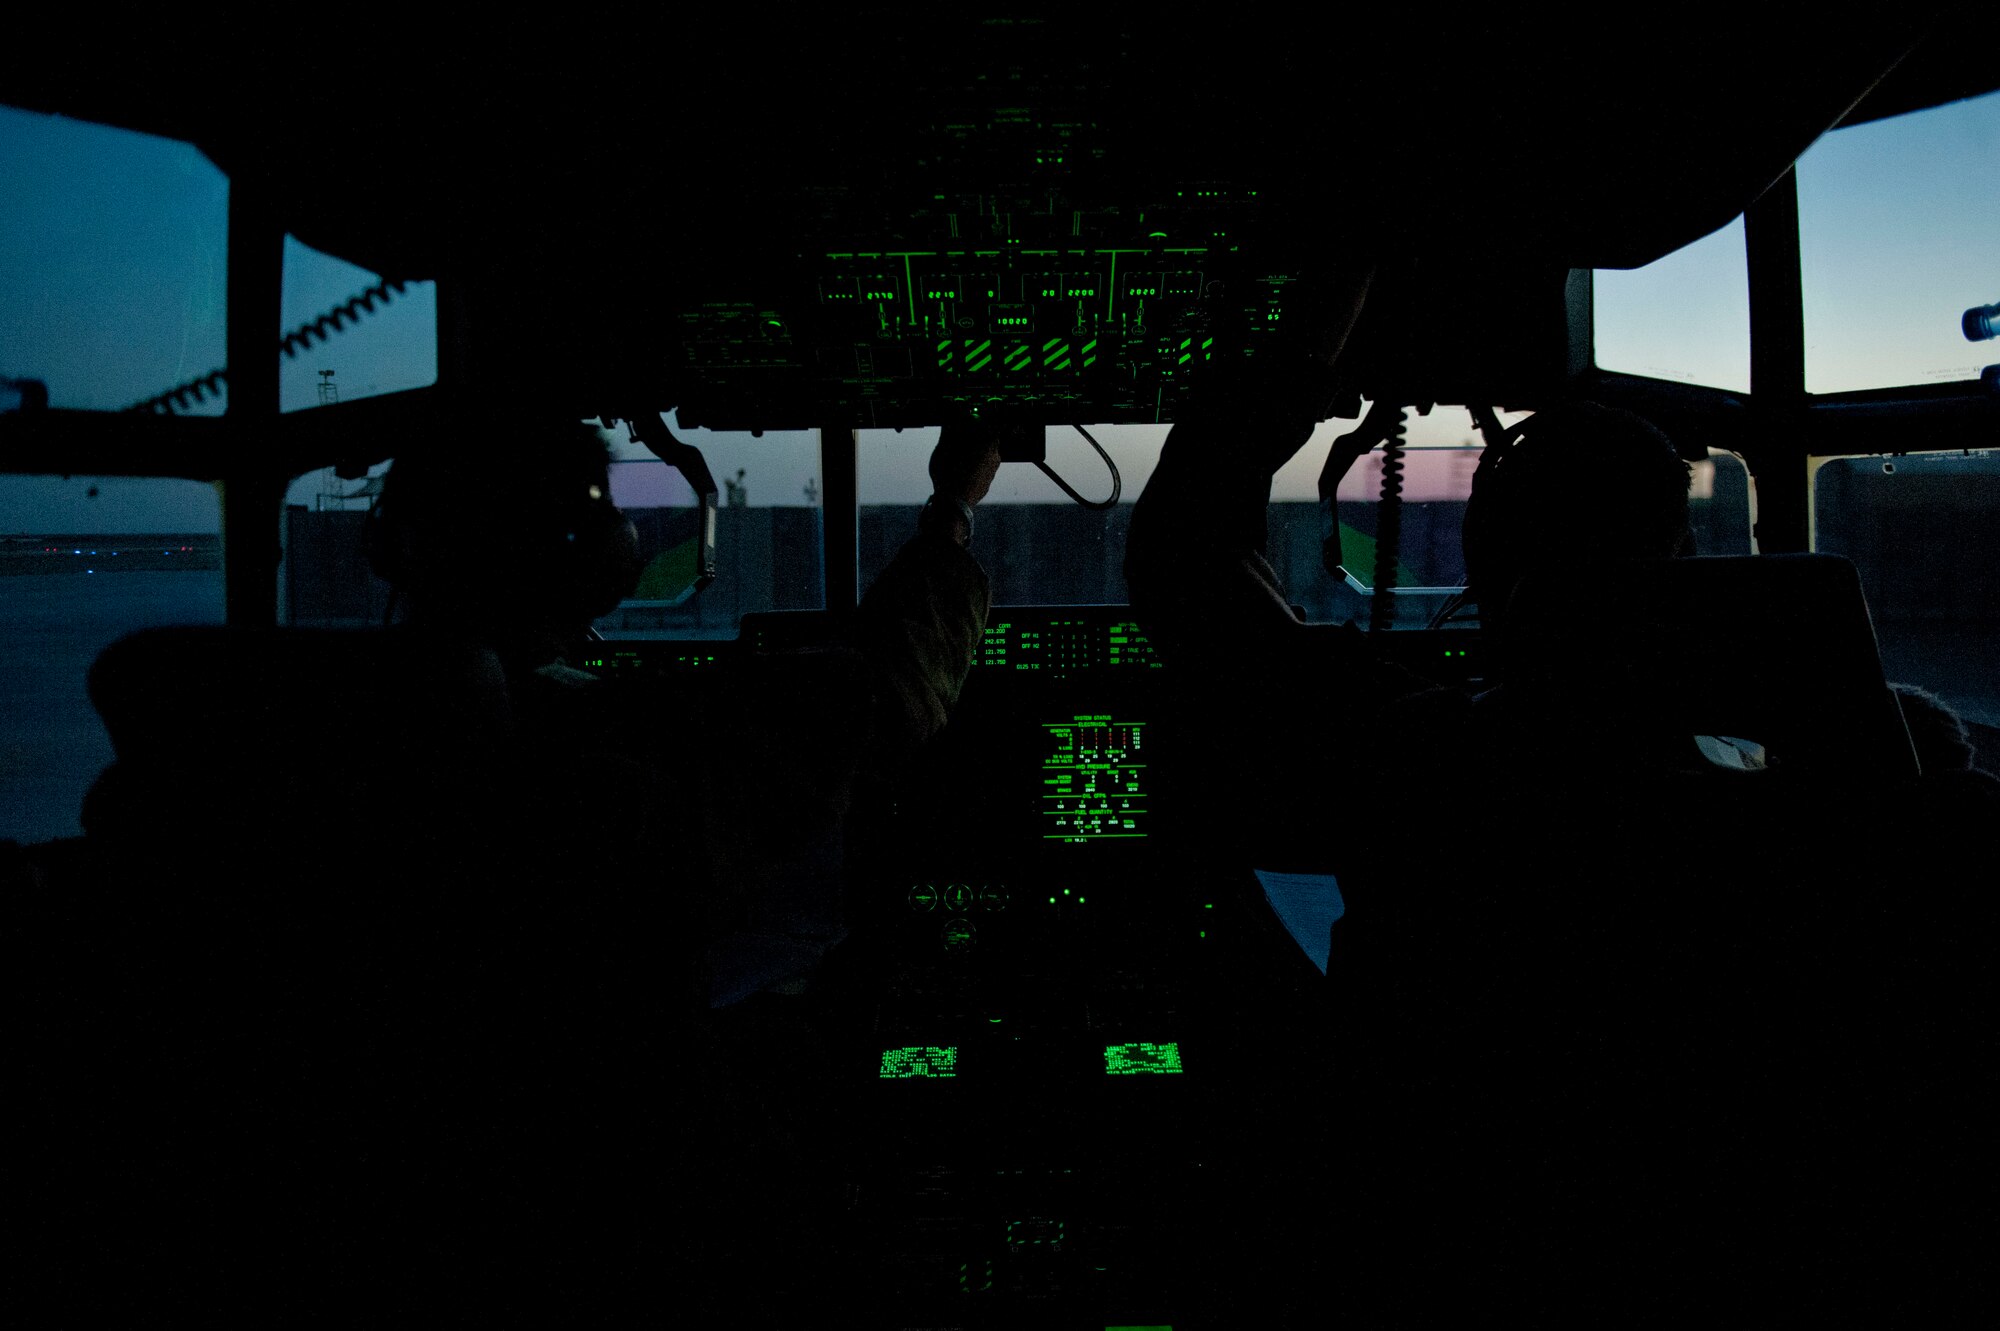 Two C-130J Super Hercules pilots from the 774th Expeditionary Airlift Squadron conduct pre-flight operations prior to takeoff Dwyer Airfield, Afghanistan, Aug. 19, 2016. In addition to carrying cargo and personnel, the C-130J is able
to offload fuel into storage tanks at locations across the globes. (U.S. Air Force photo by Capt. Korey Fratini)